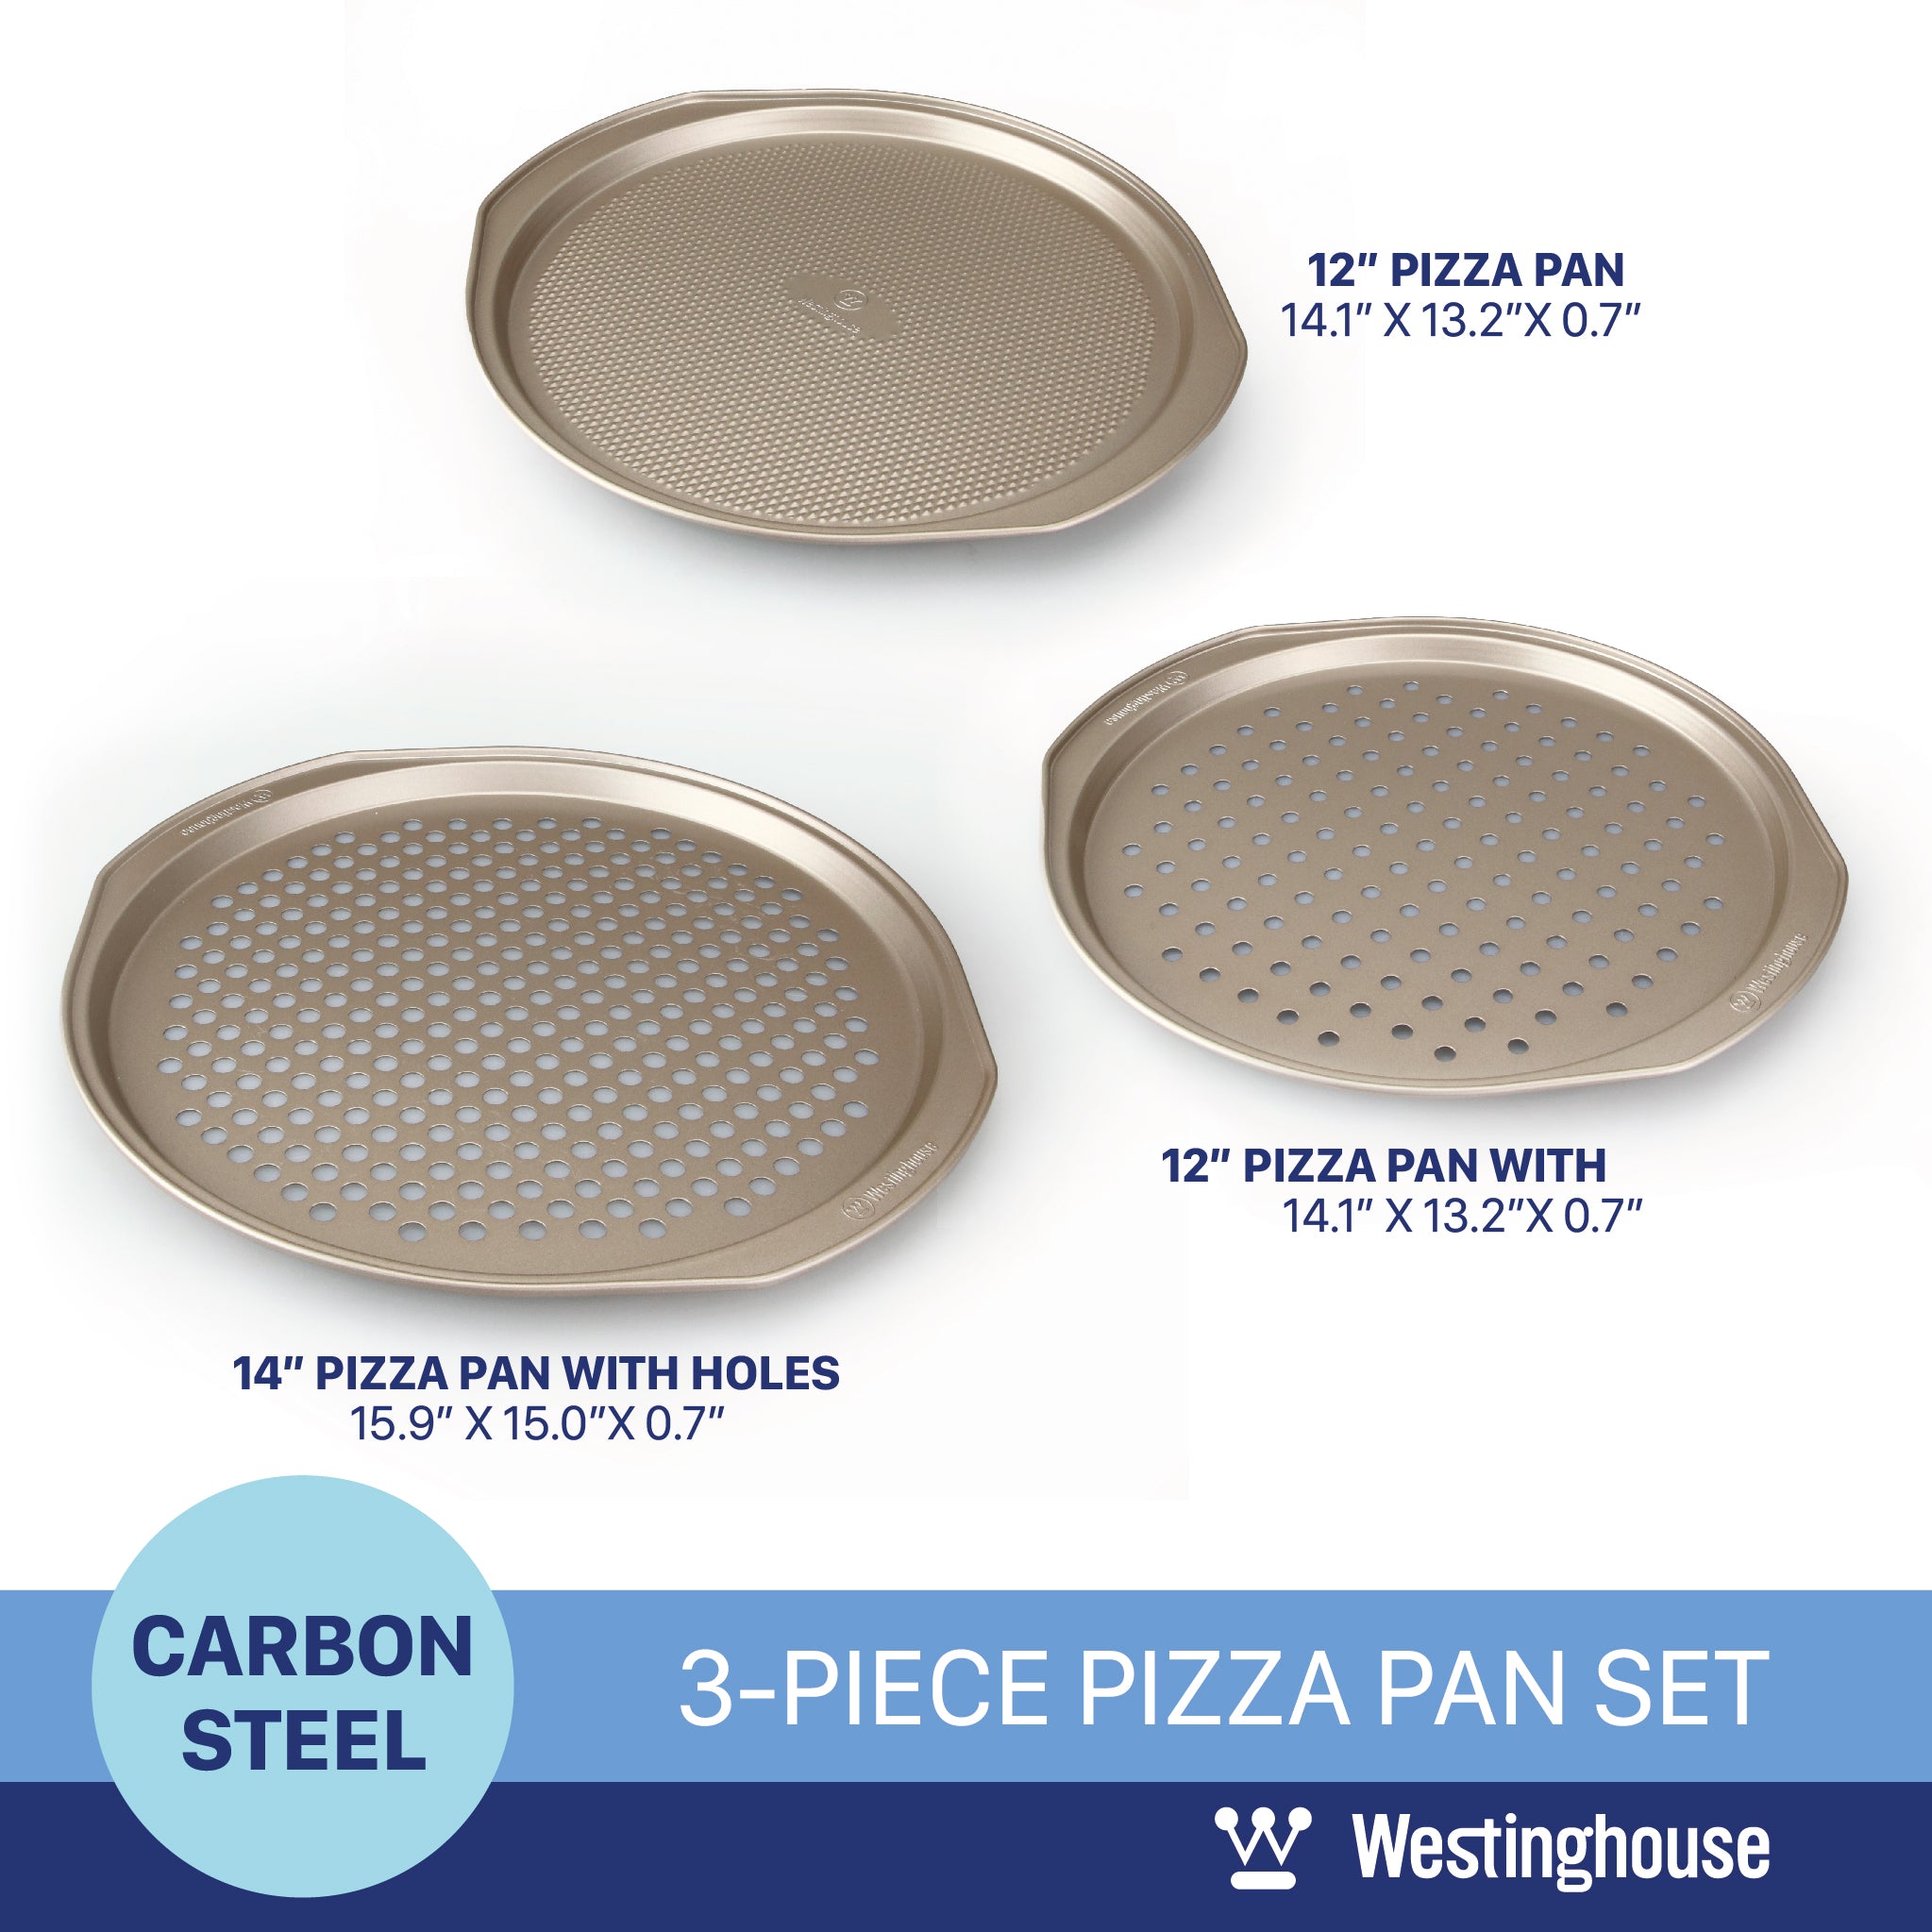 3-PIECE CARBON STEEL PIZZA PAN SET, WITH 2x12